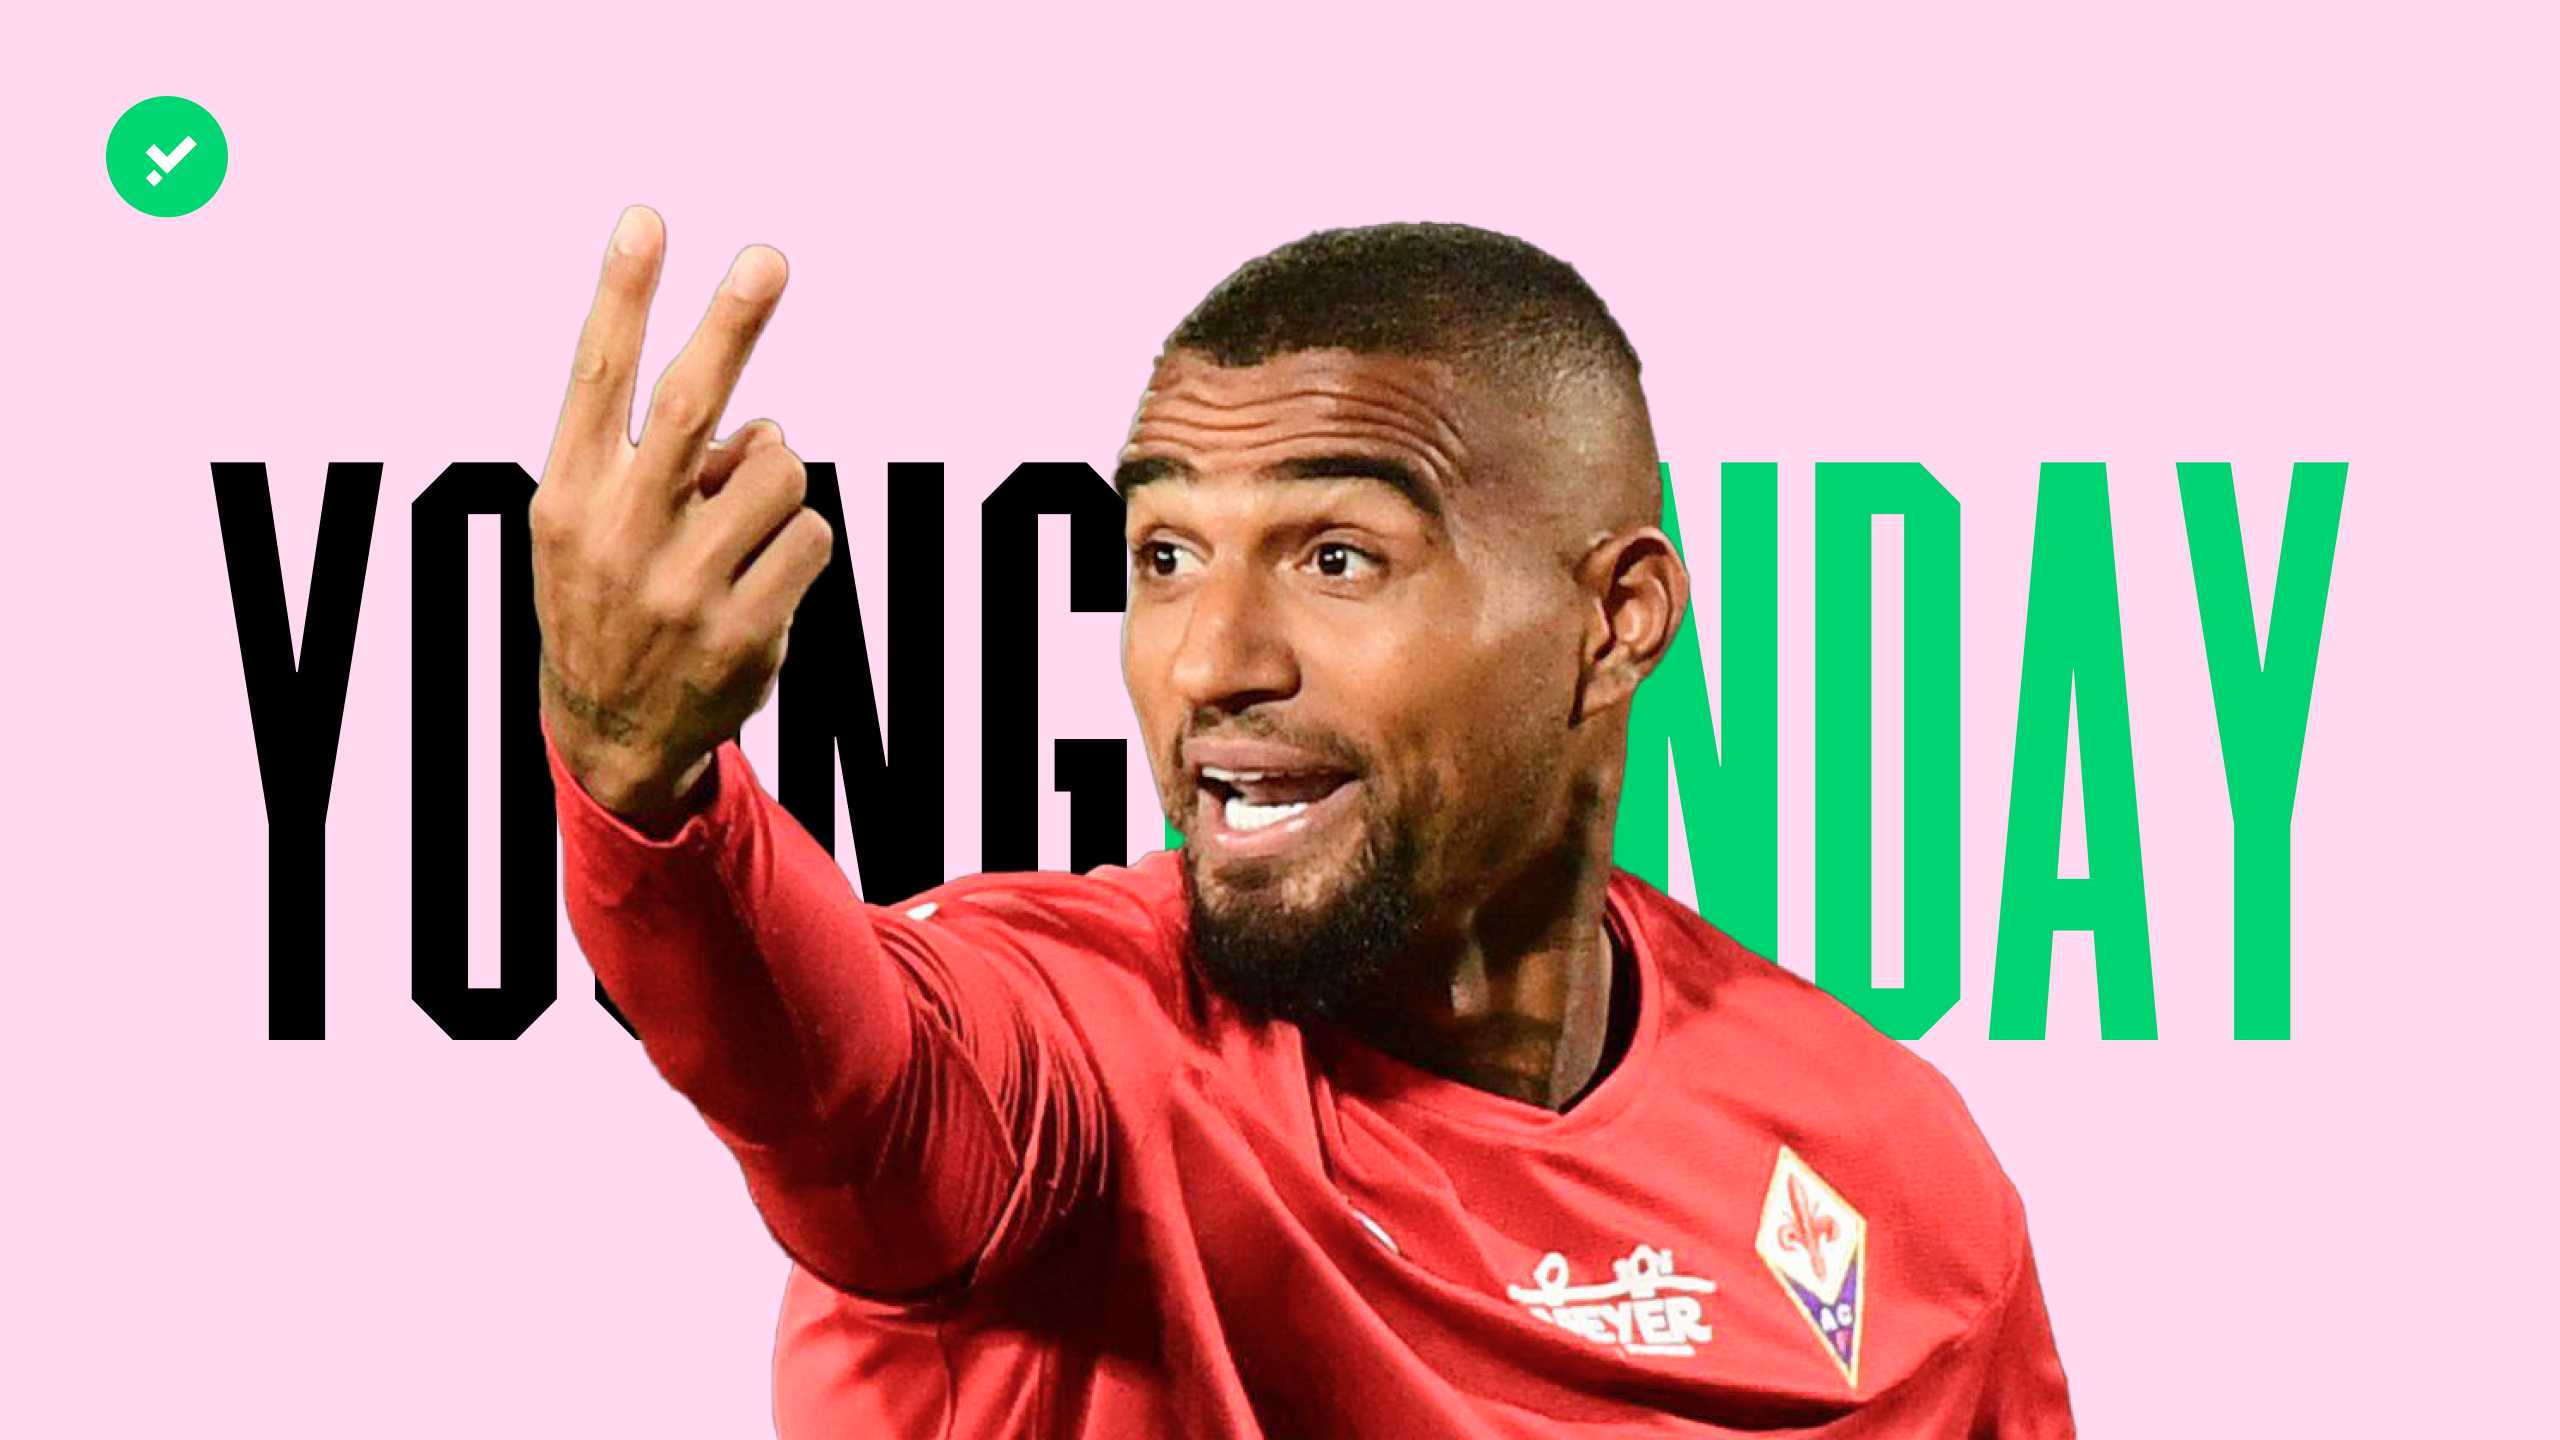 Boateng’s wedding in the metaverse, a euro-pegged stablecoin and PSG’s fan token